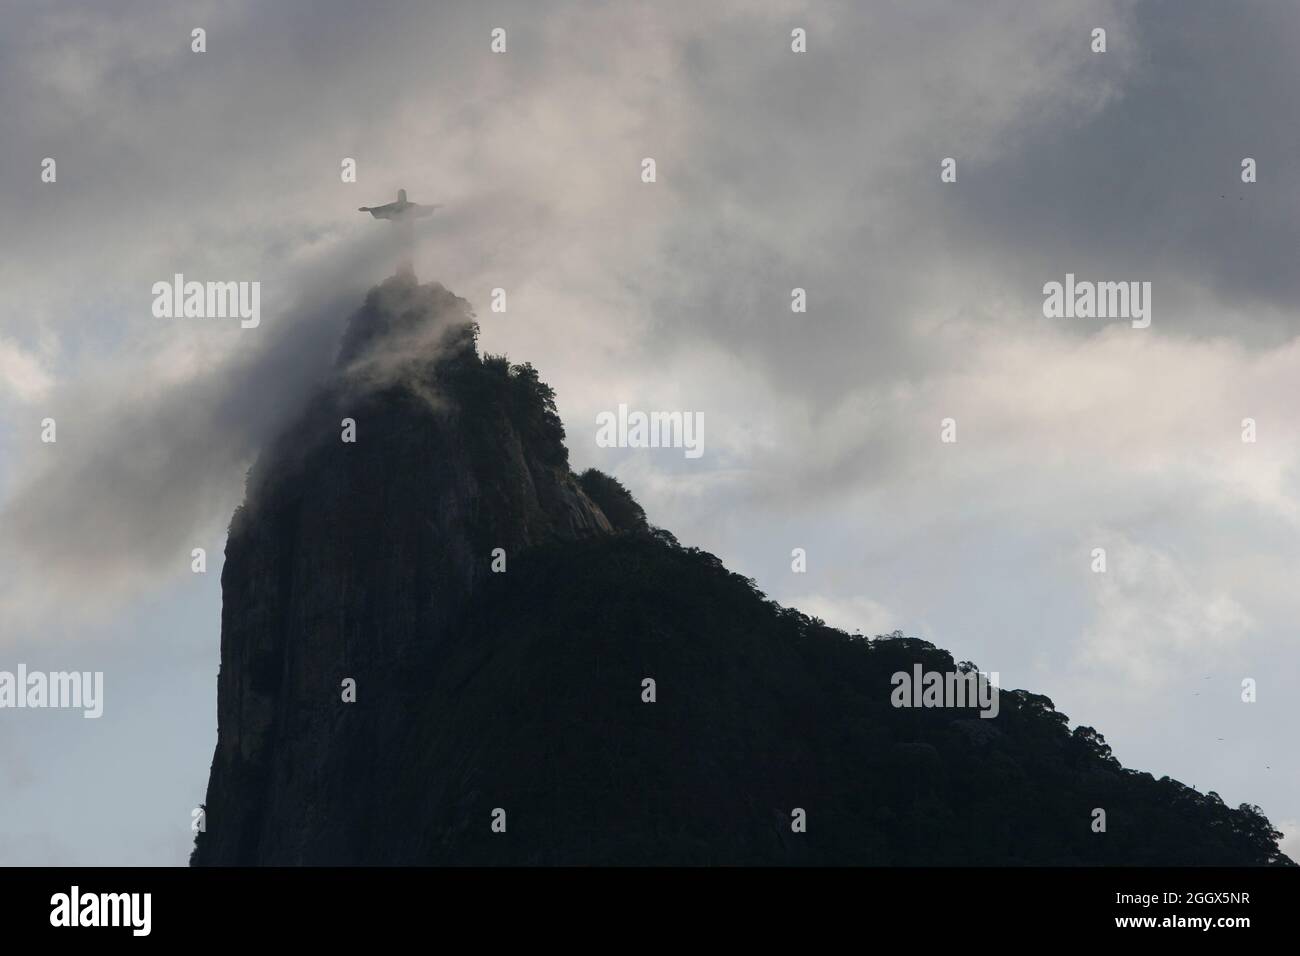 Christ the Redeemer statue on top of Corcovado mountain. Stock Photo